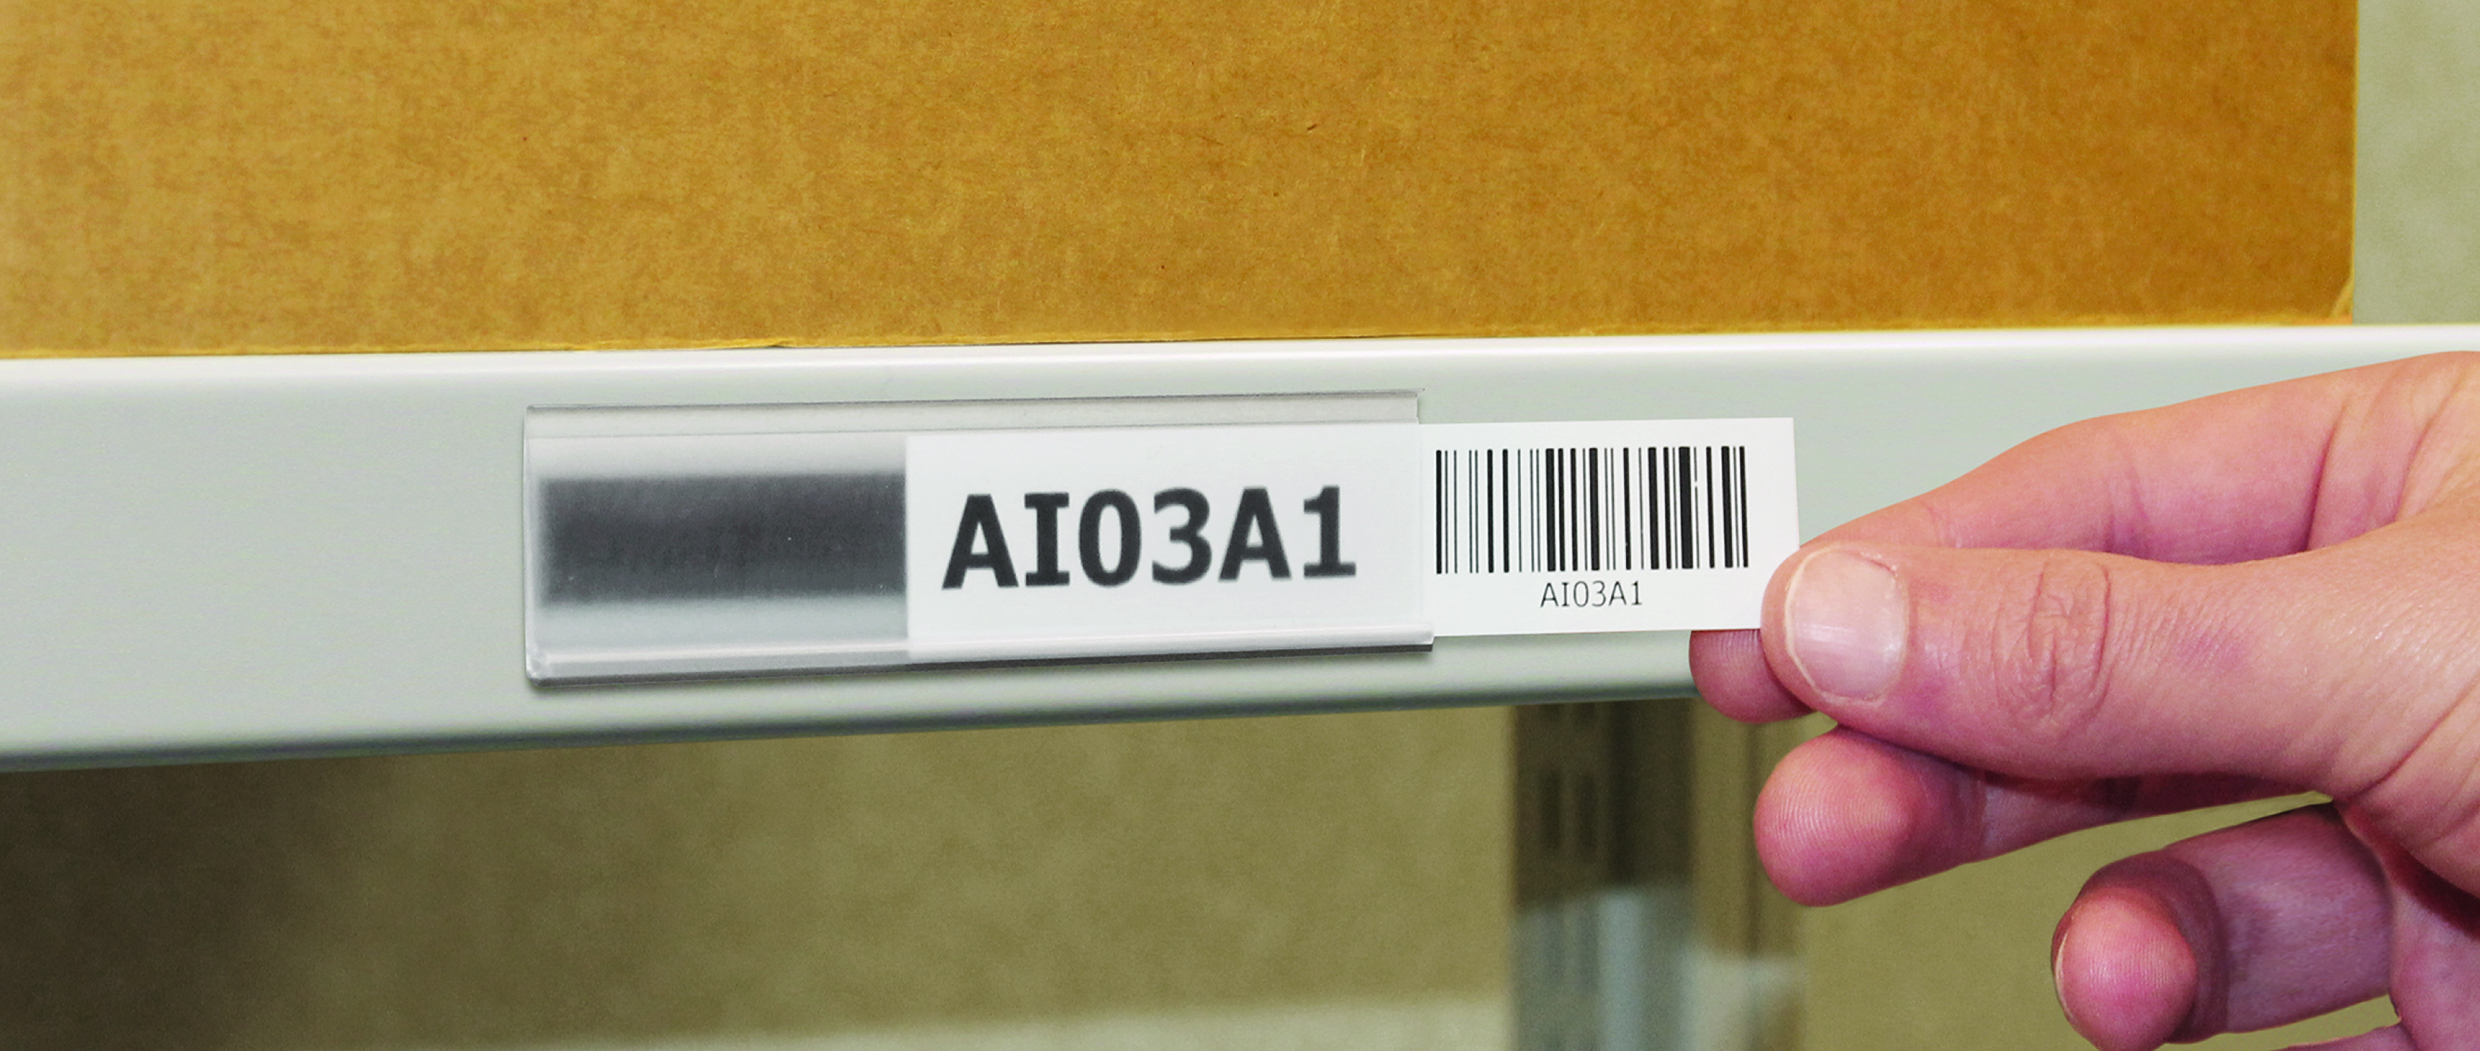 Magnetic ticket holder shown in iuse on office steel sheling for product/shelf identification